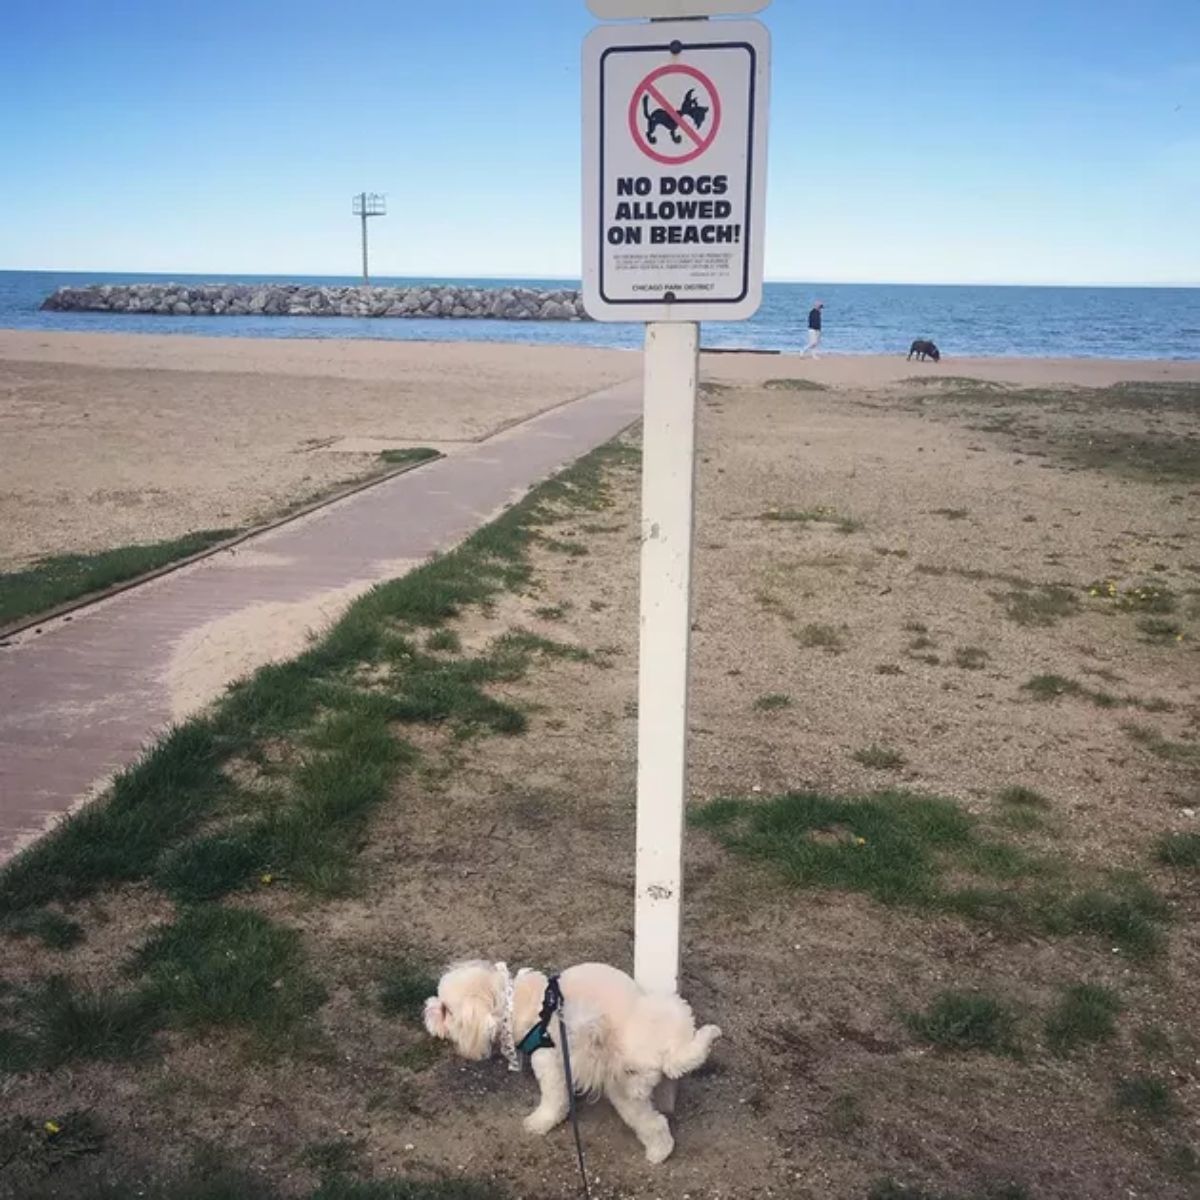 small fluffy white havanese urinating on the pole holding a NO DOGS ALLOWED ON BEACH sign on the beach